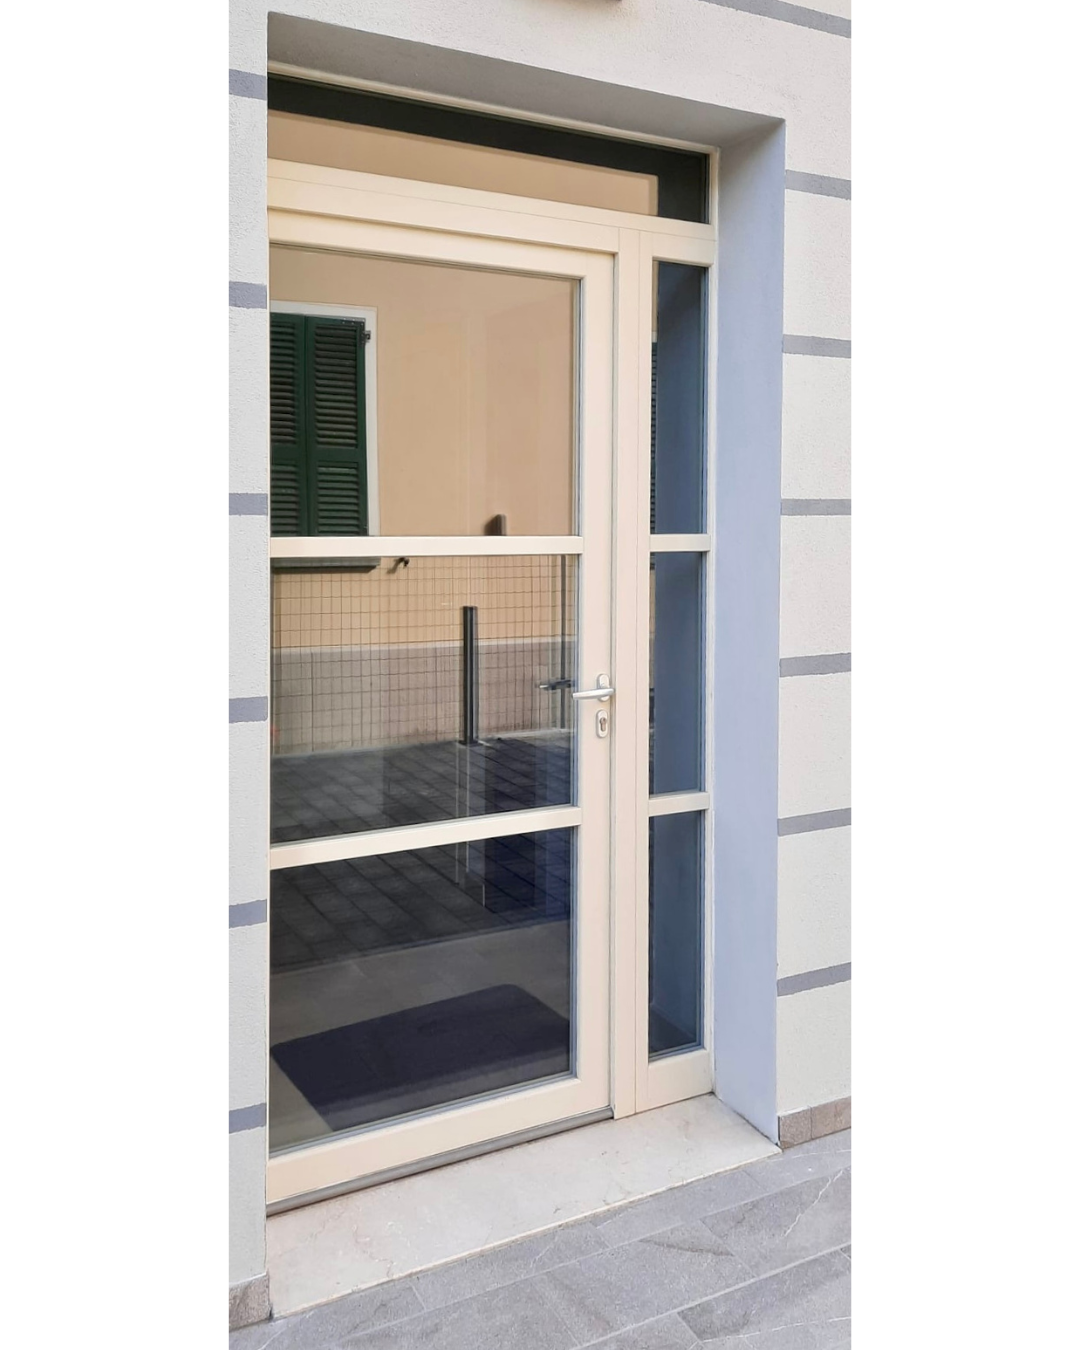 New supply of EXTRALUSSO model windows painted RAL for a beautiful villa in Fidenza.